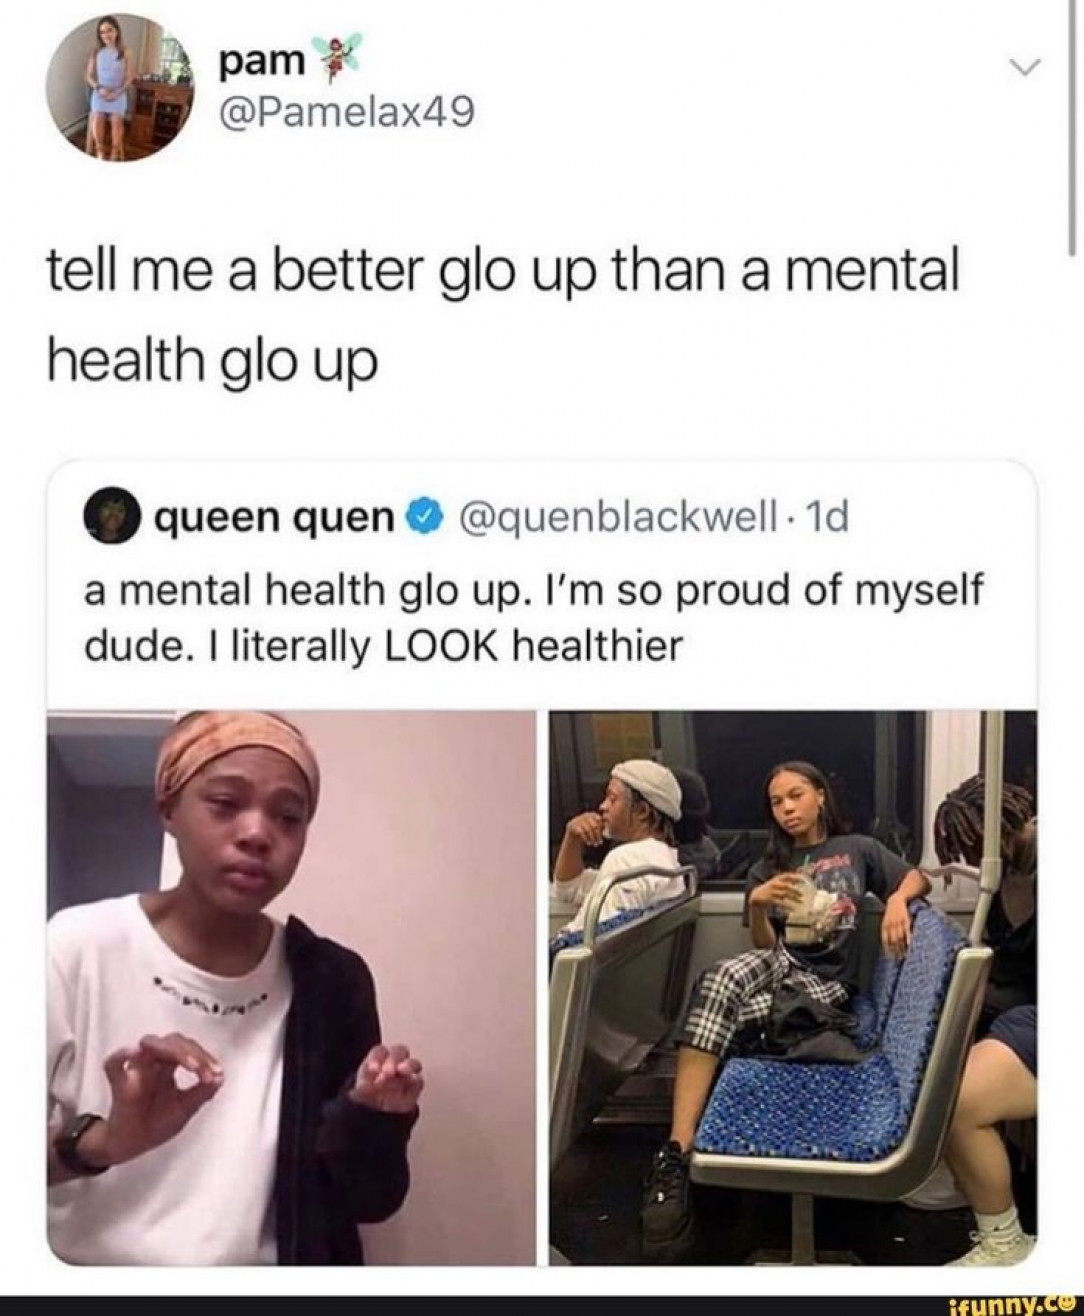 Hope we all have a mental health glowup!